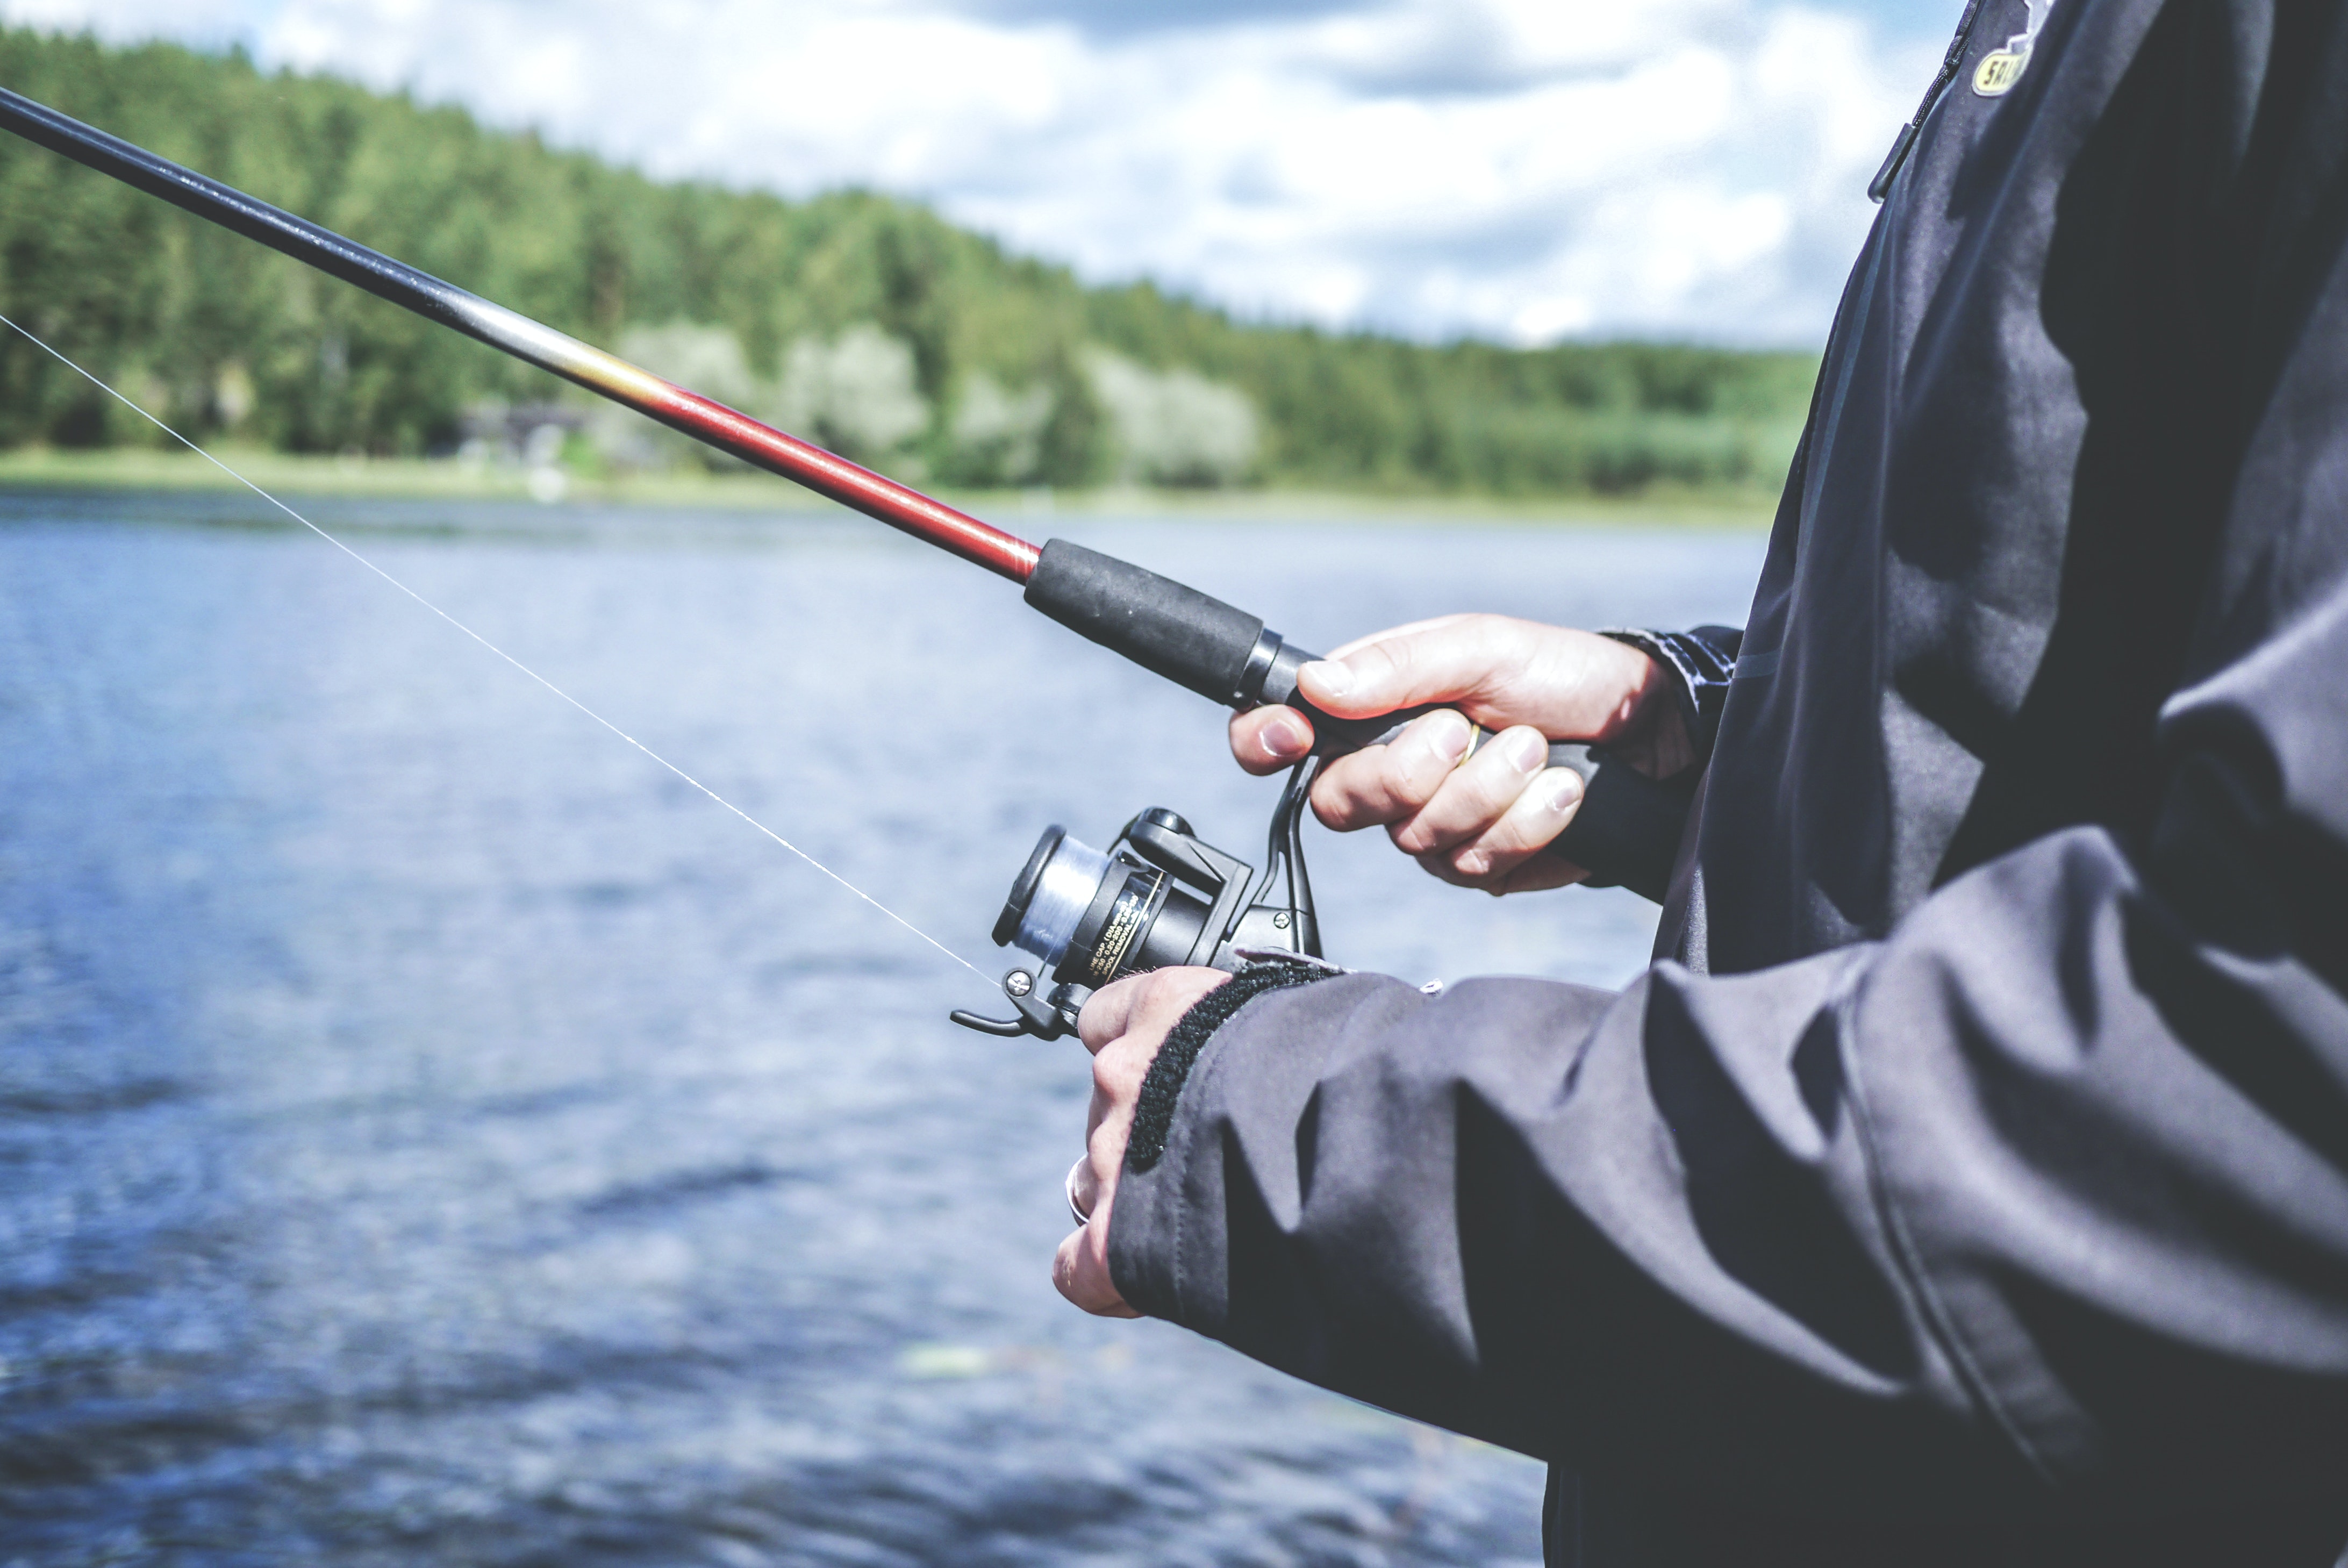 What are the advantages and disadvantages of spinning rods and